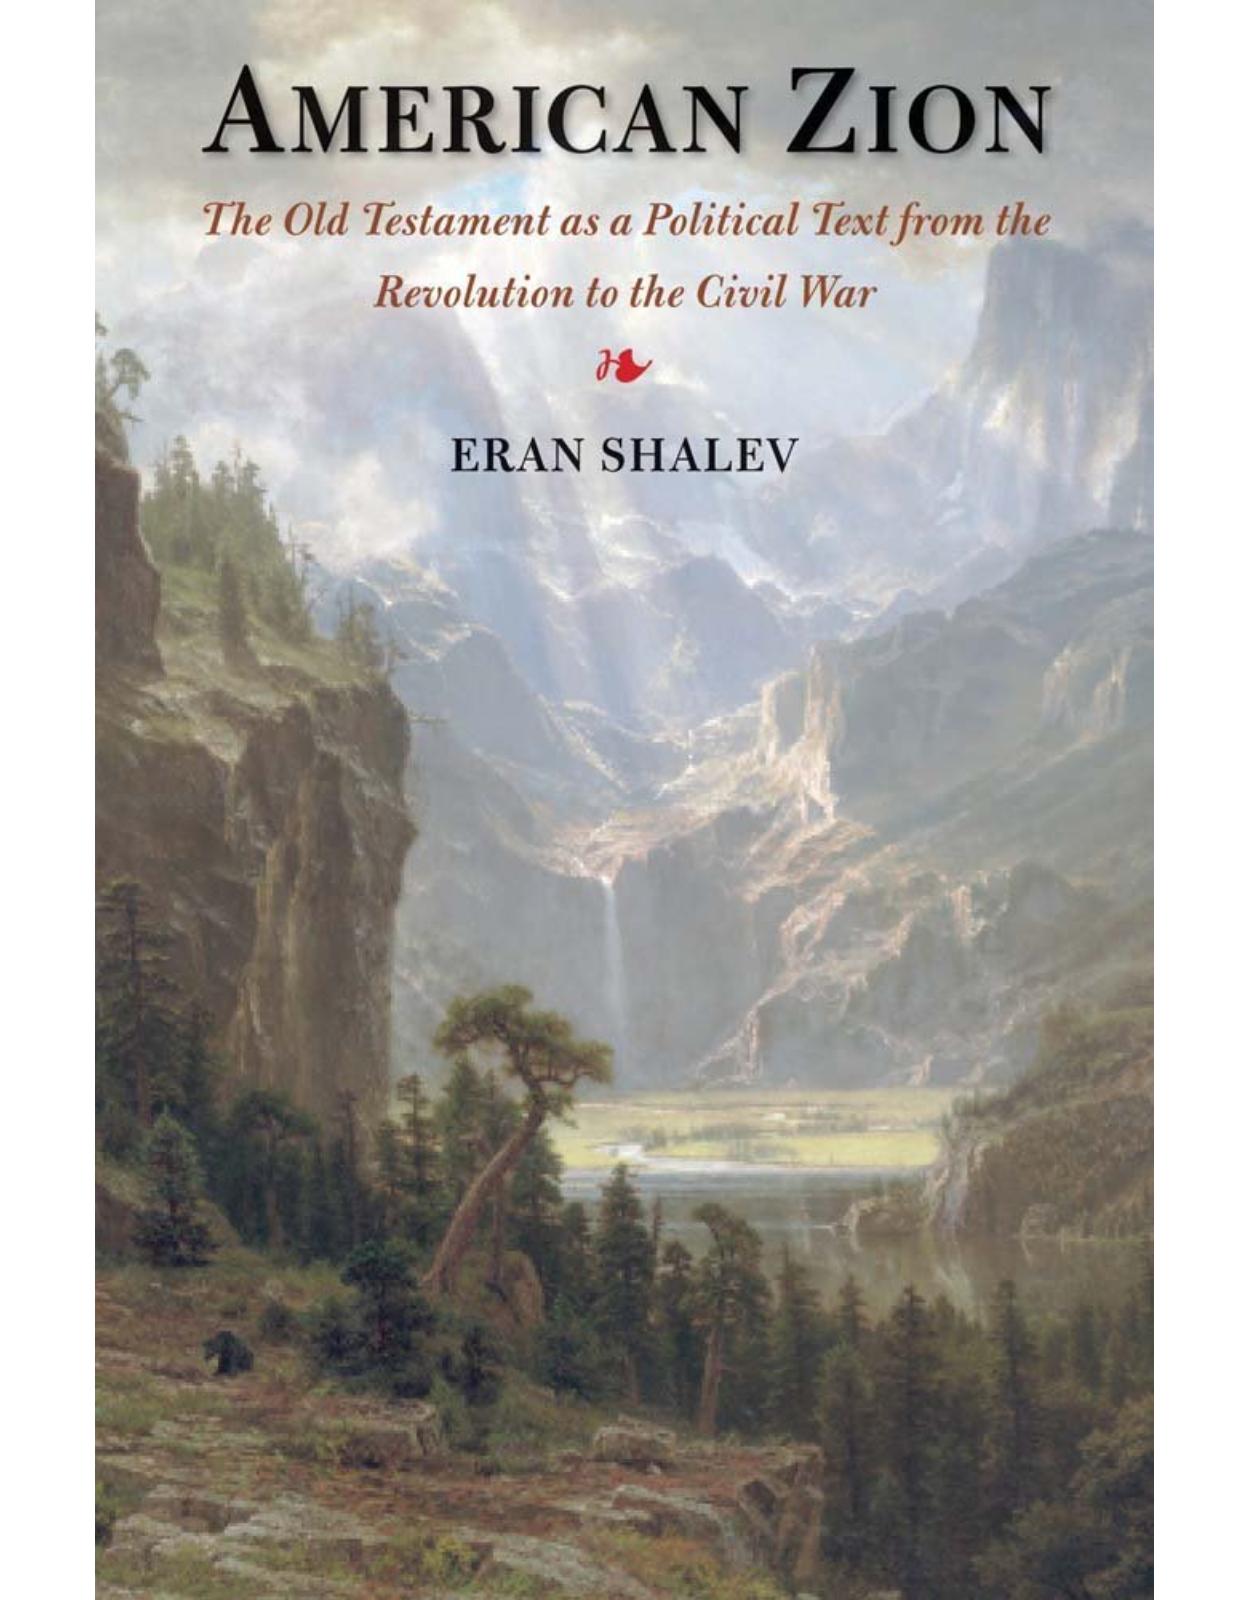 American Zion. The Old Testament as a Political Text from the Revolution to the Civil War